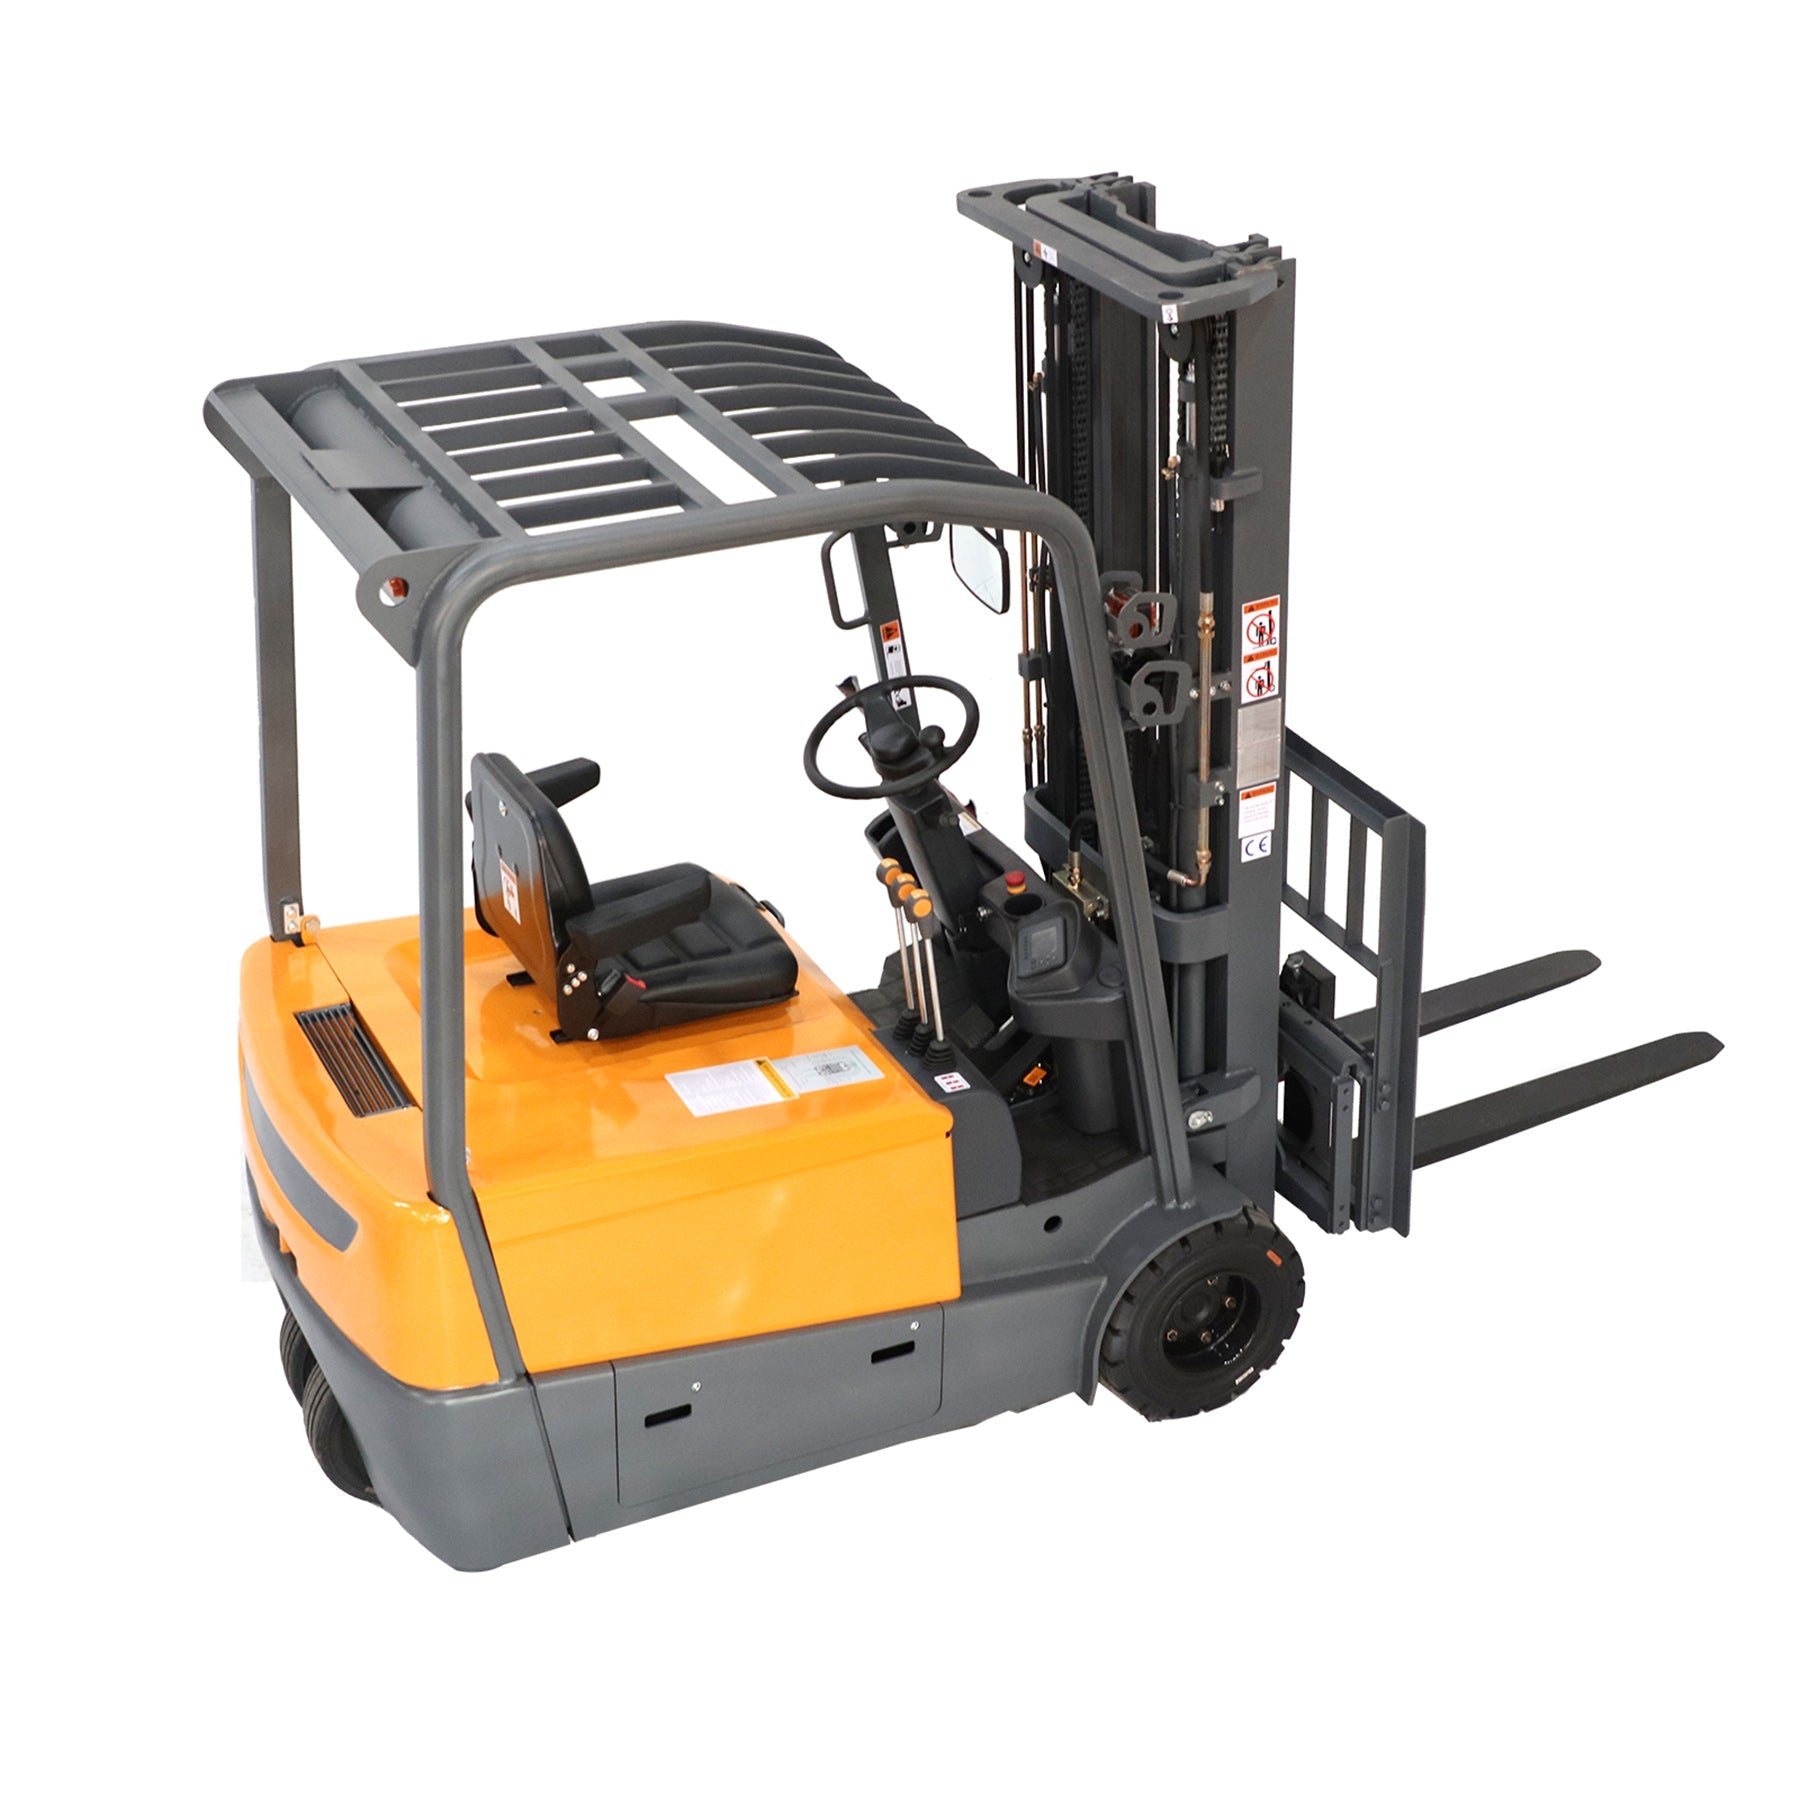 ApolloLift | 3 Wheels Lithium-ion Battery Forklift with Heating Film 4400lbs Cap. 220" Lifting A-4003